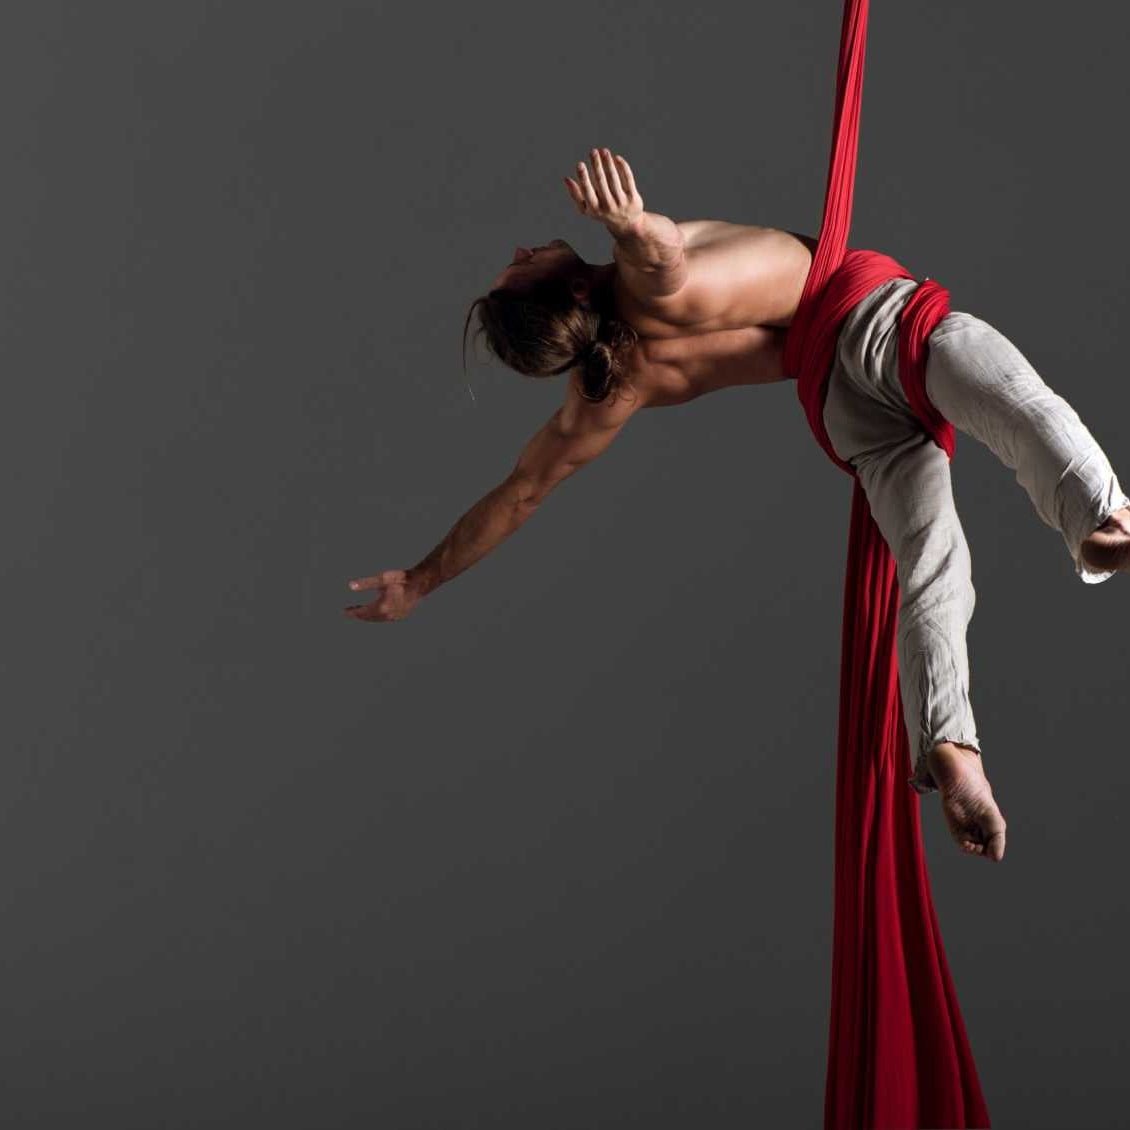 AERIAL RIGGING 101: How to Rig Aerial Silks